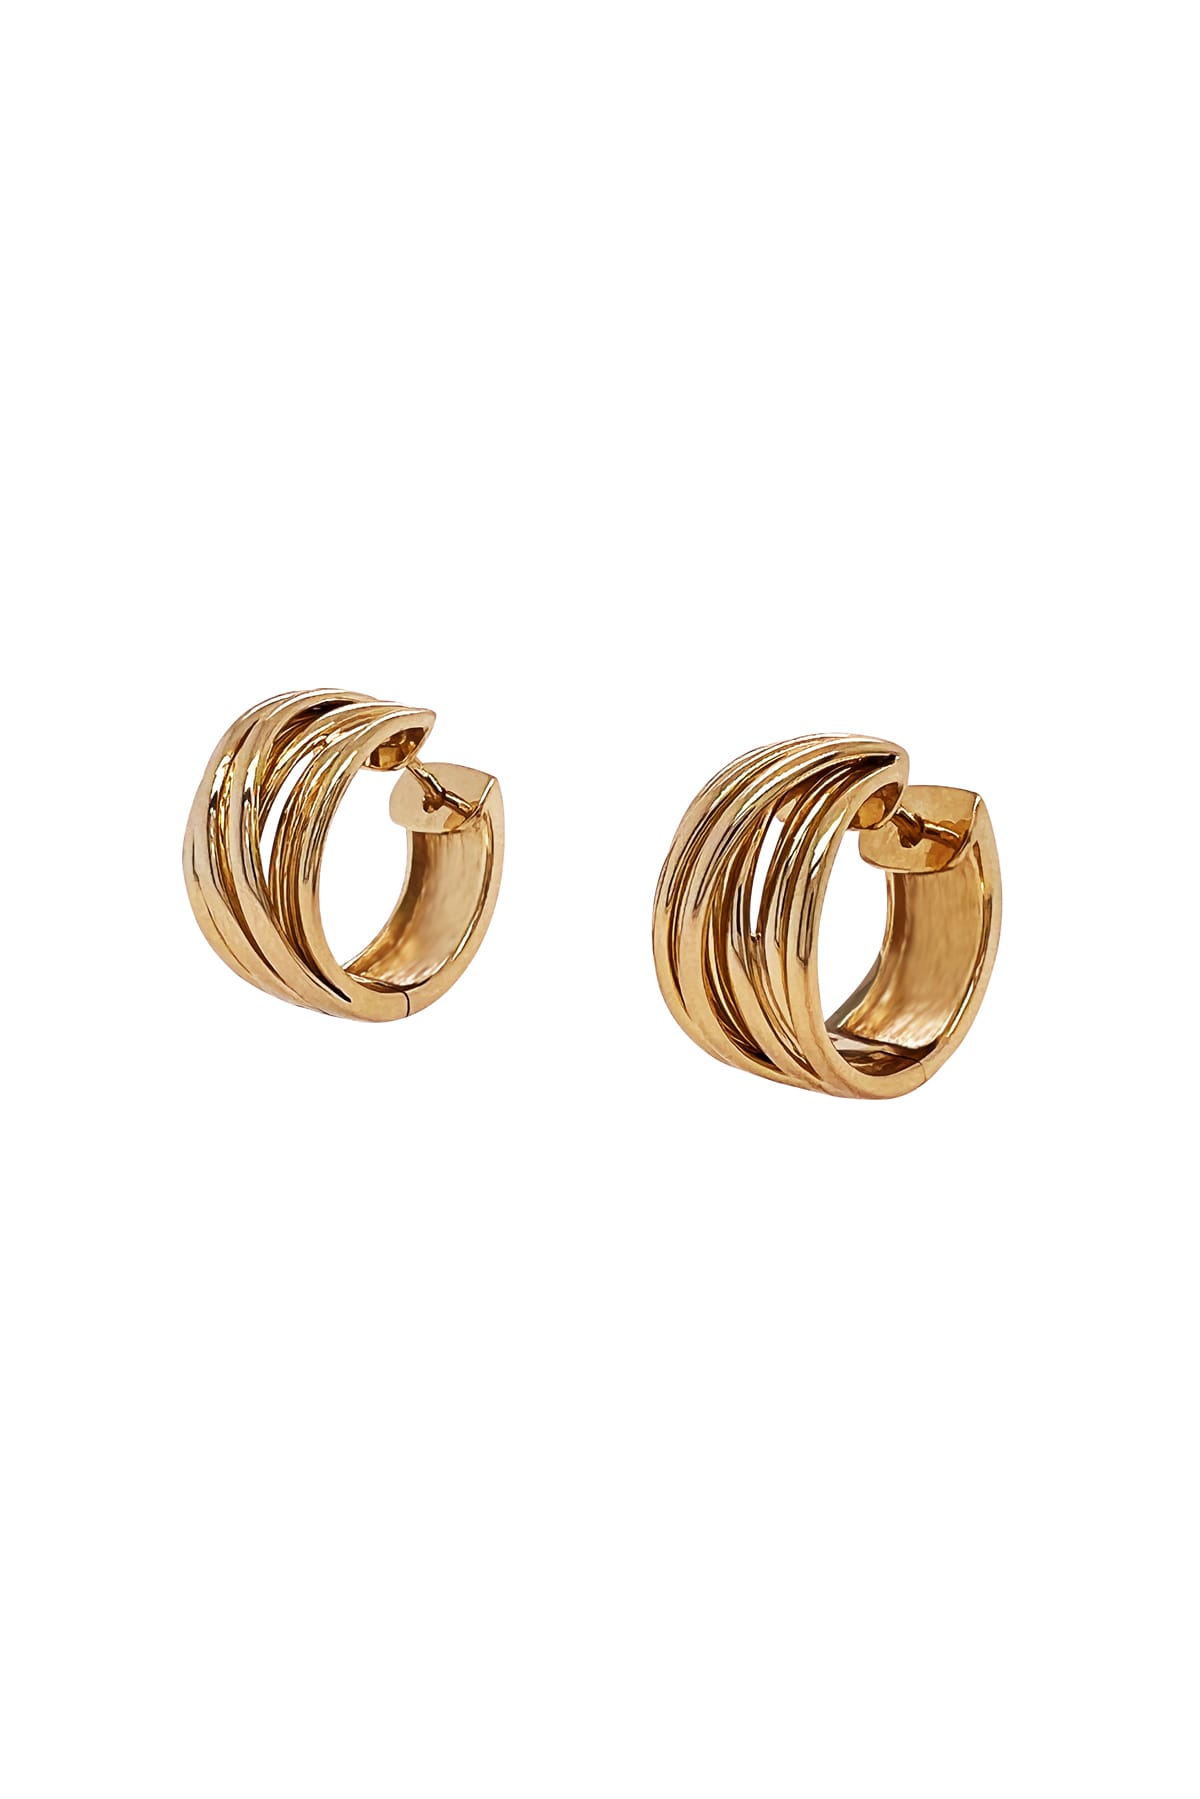 9ct Yellow Gold Fancy Huggie Earrings available at LeGassick Diamonds and Jewellery Gold Coast, Australia.